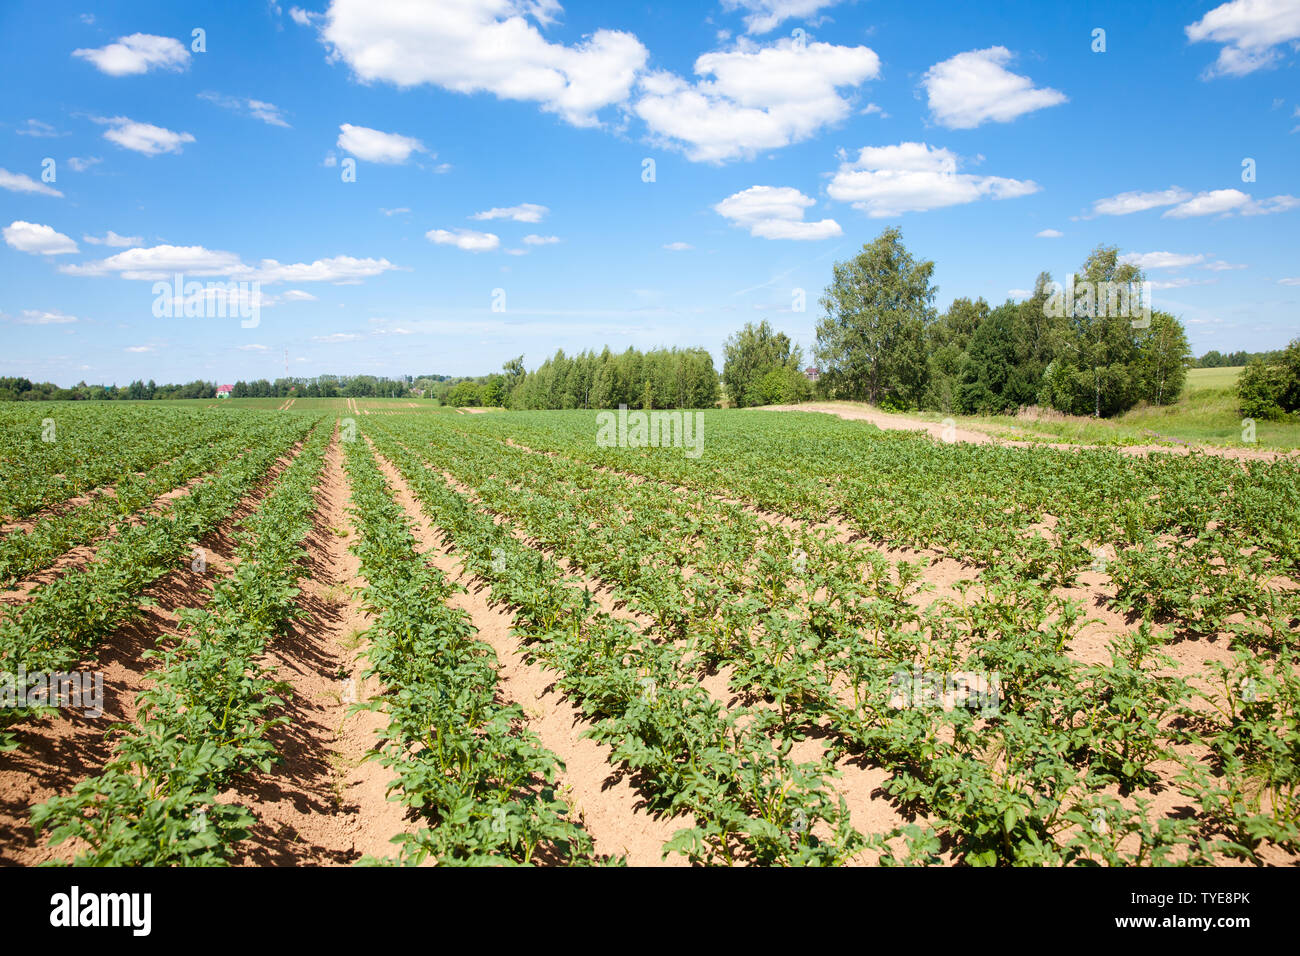 Rows of potatoes on the farm field. Cultivation of potatoes in Russia. Landscape with agricultural fields in sunny weather. A field of potatoes in the countryside. Stock Photo